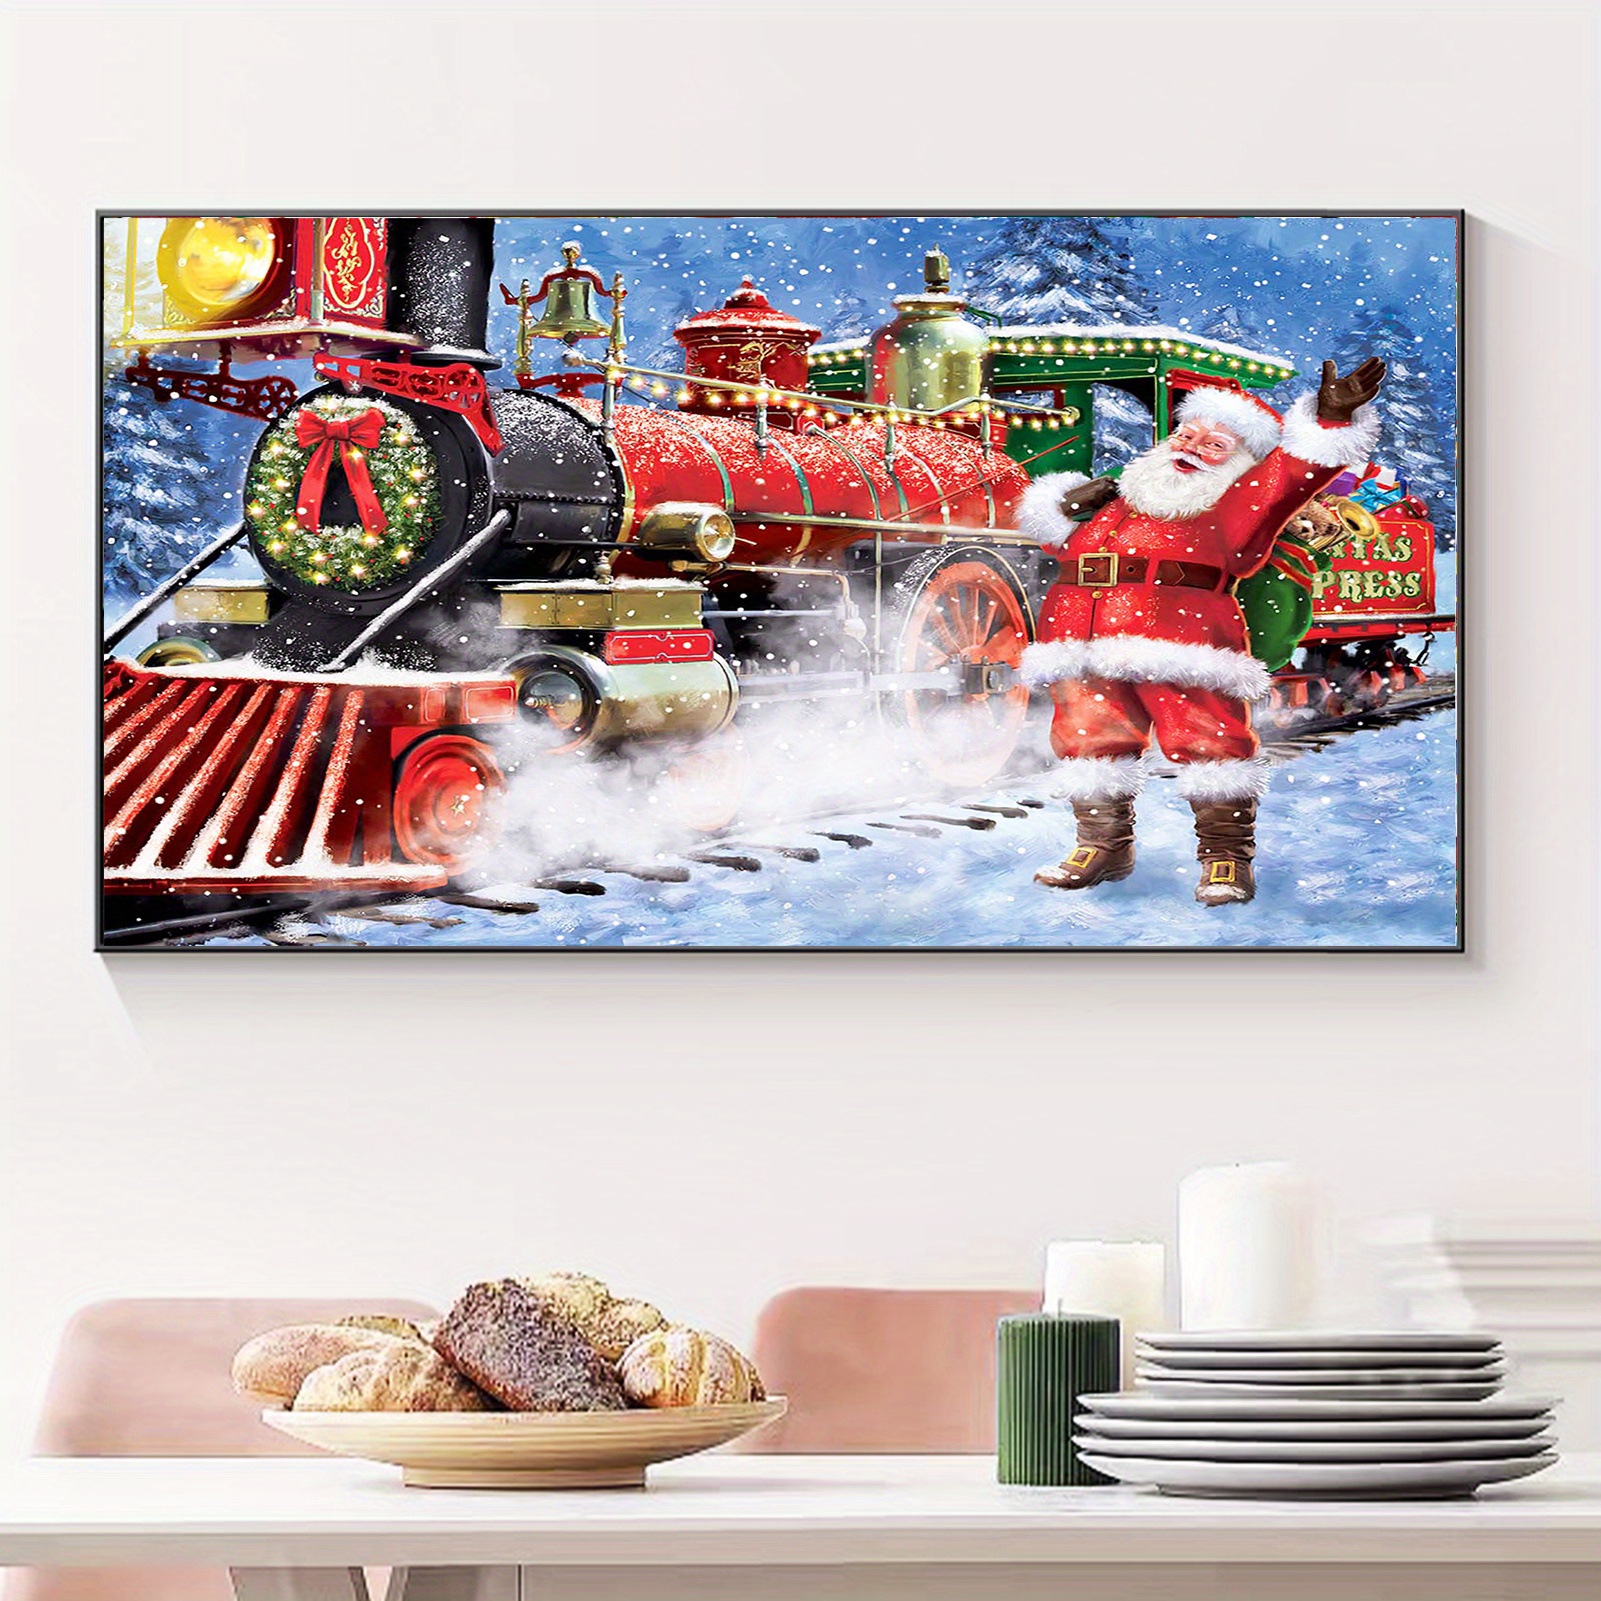 5D DIY Large Diamond Painting Kits For Adult, 15.7x27.5inch/40x70cm  Christmas Train Round Full Artificial Diamond Art Kits Picture By Number  Kits For